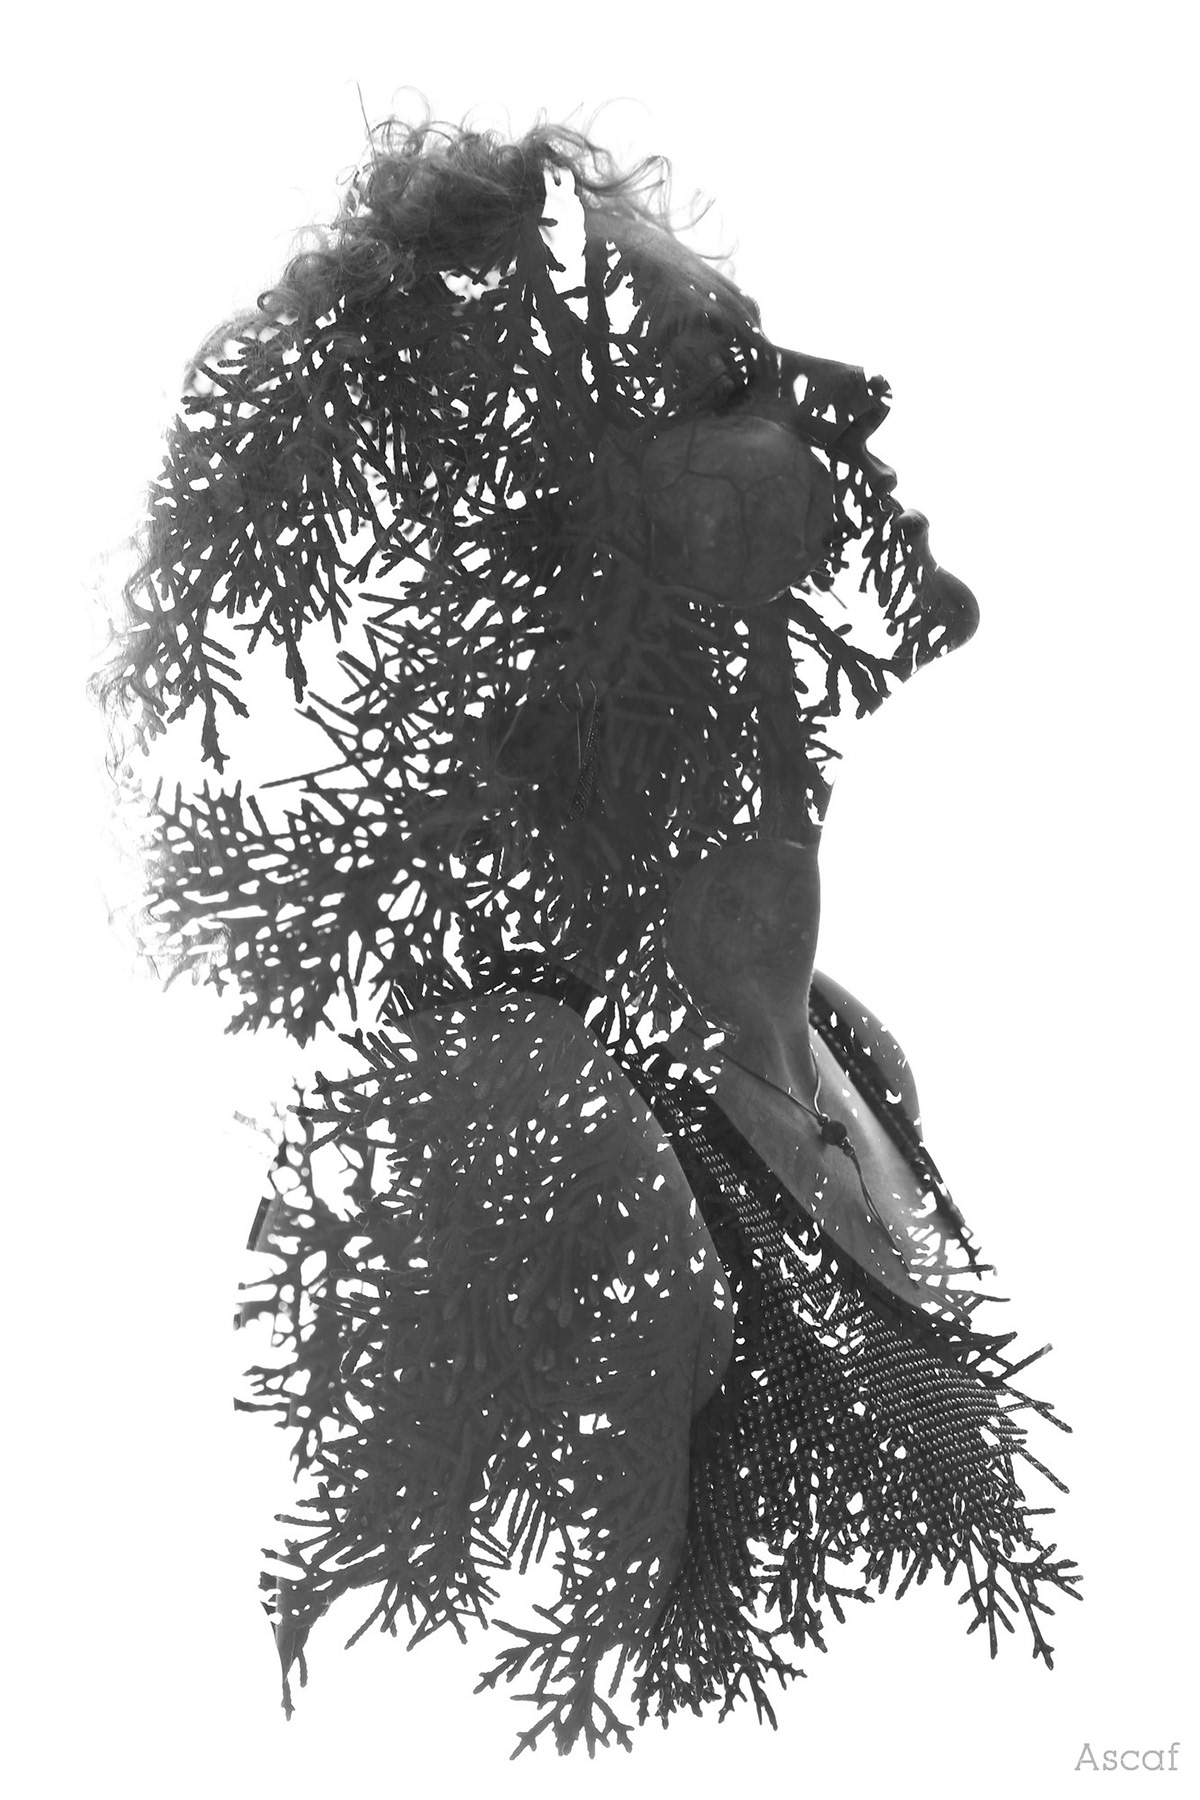 Ascaf double exposure portraits israel Nature people humans leaves branches